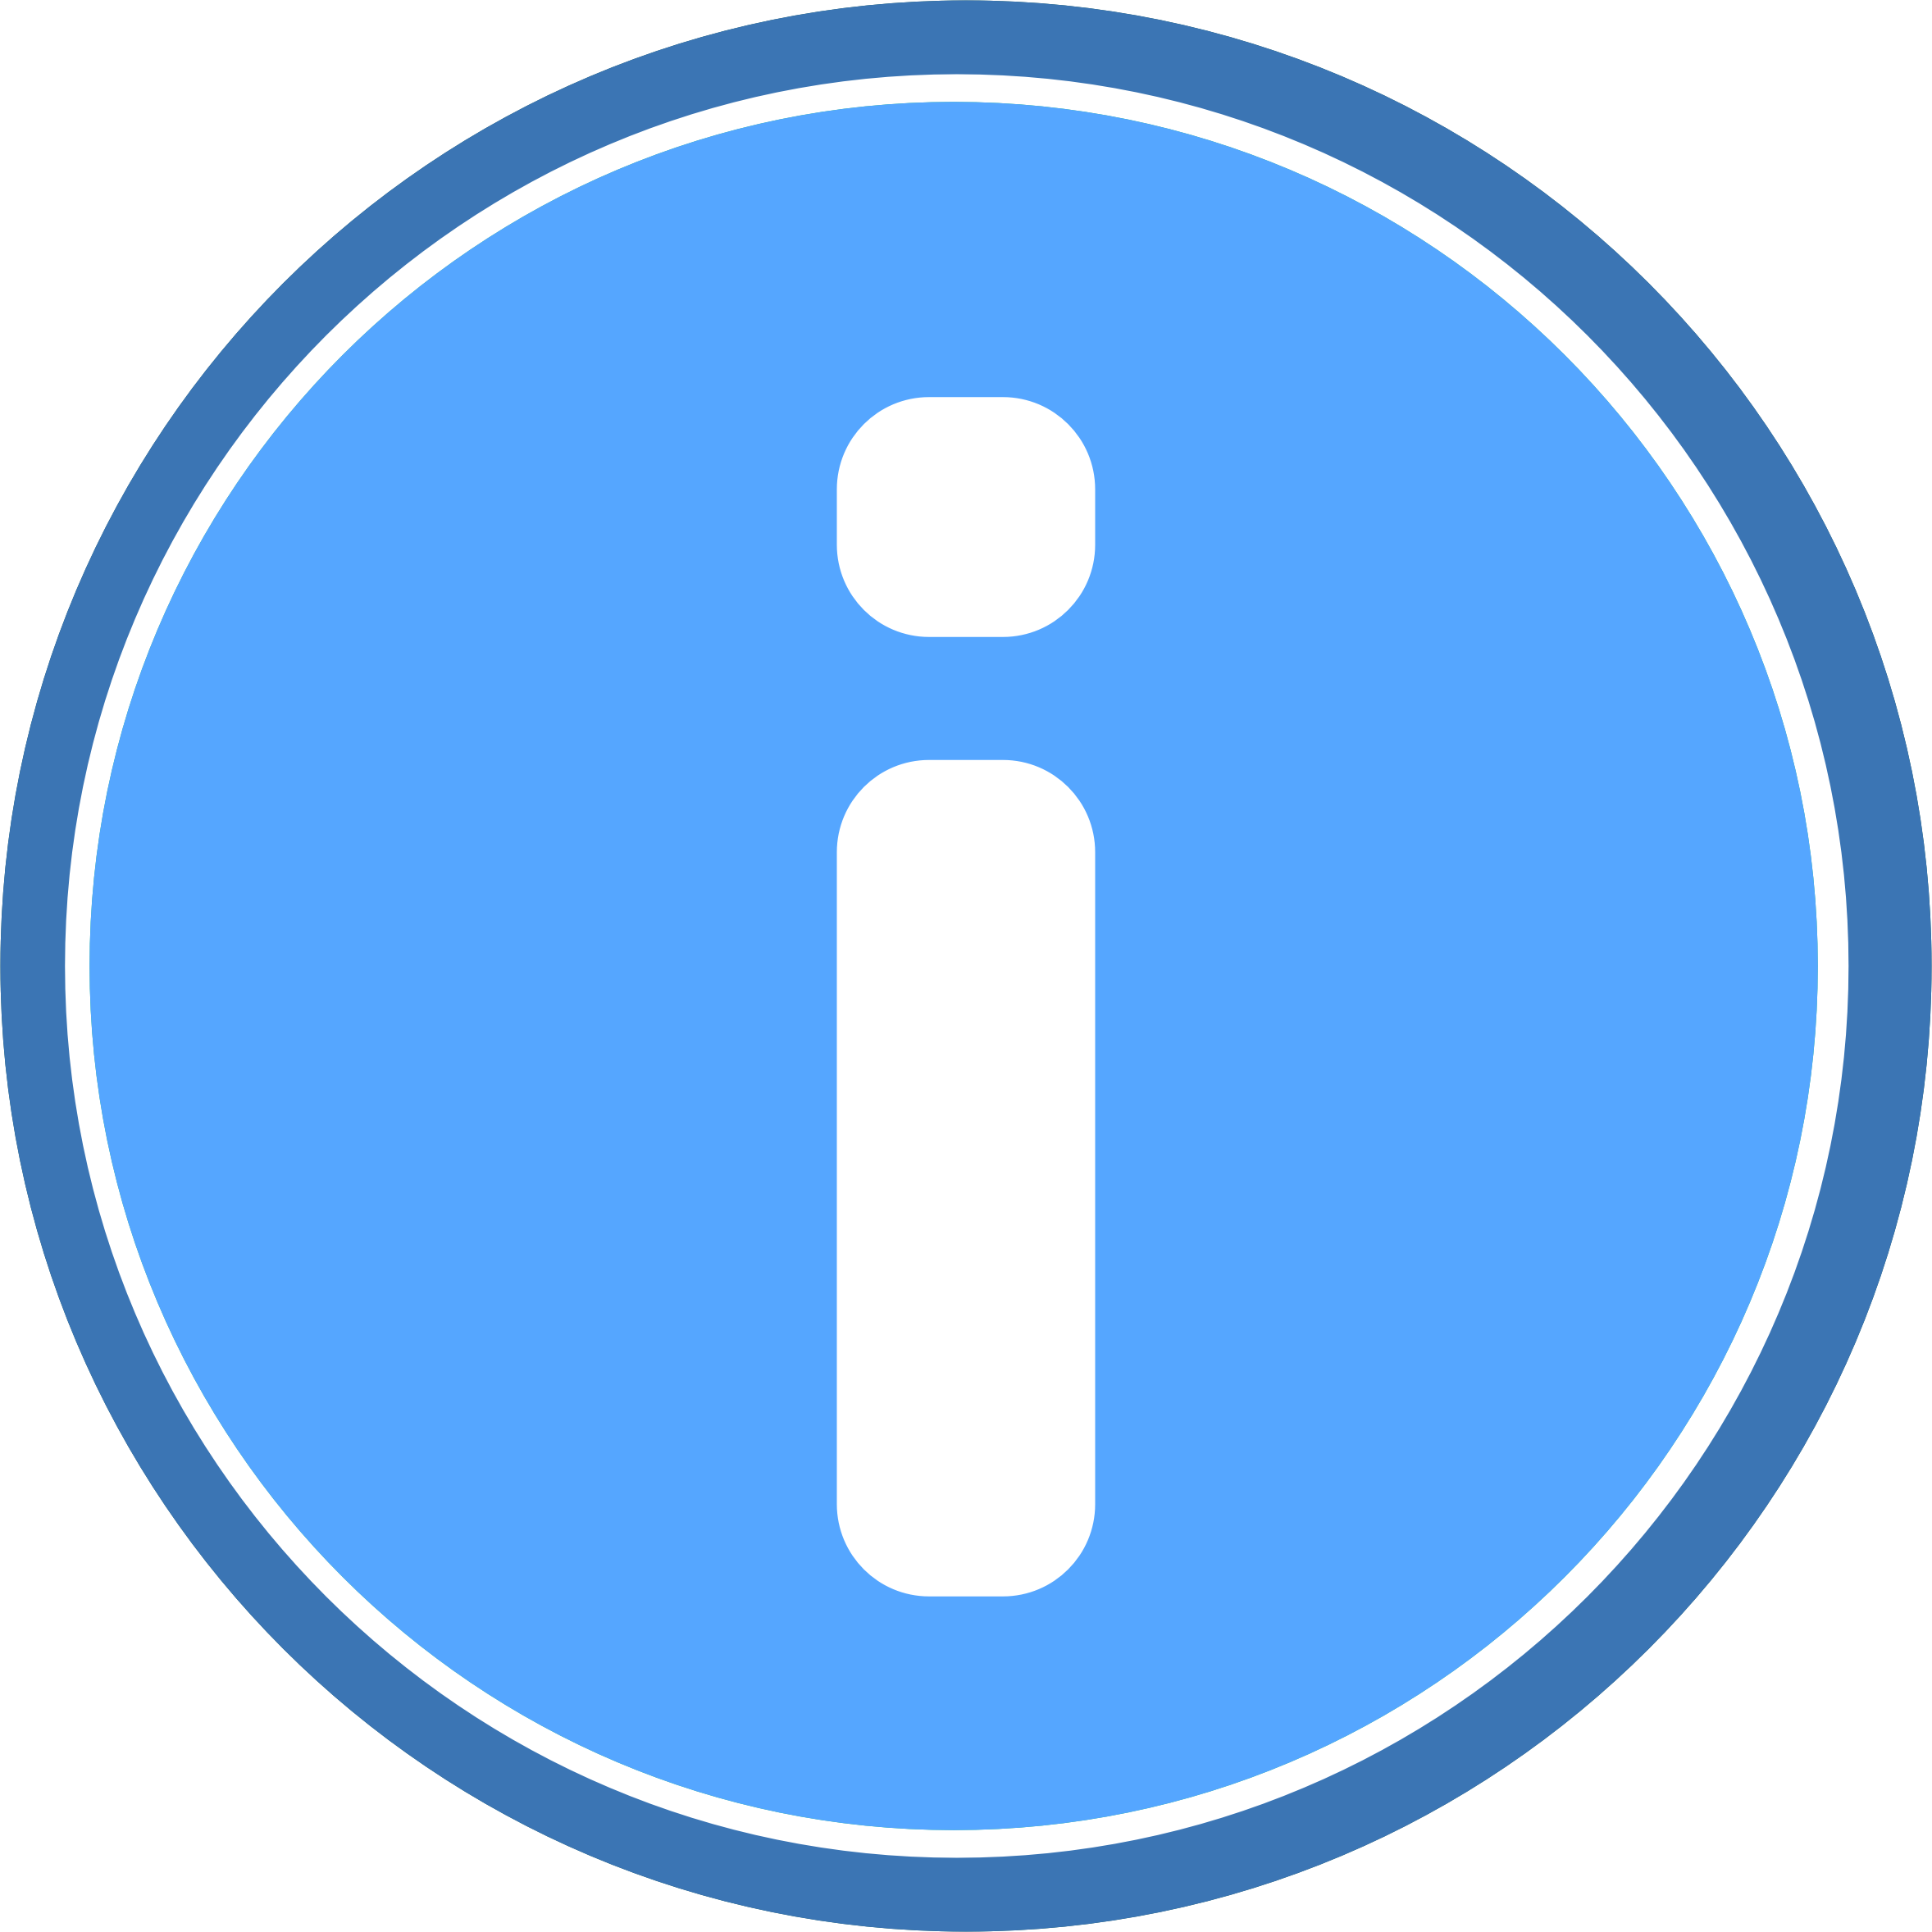 A Blue Circle With A White Letter I In It